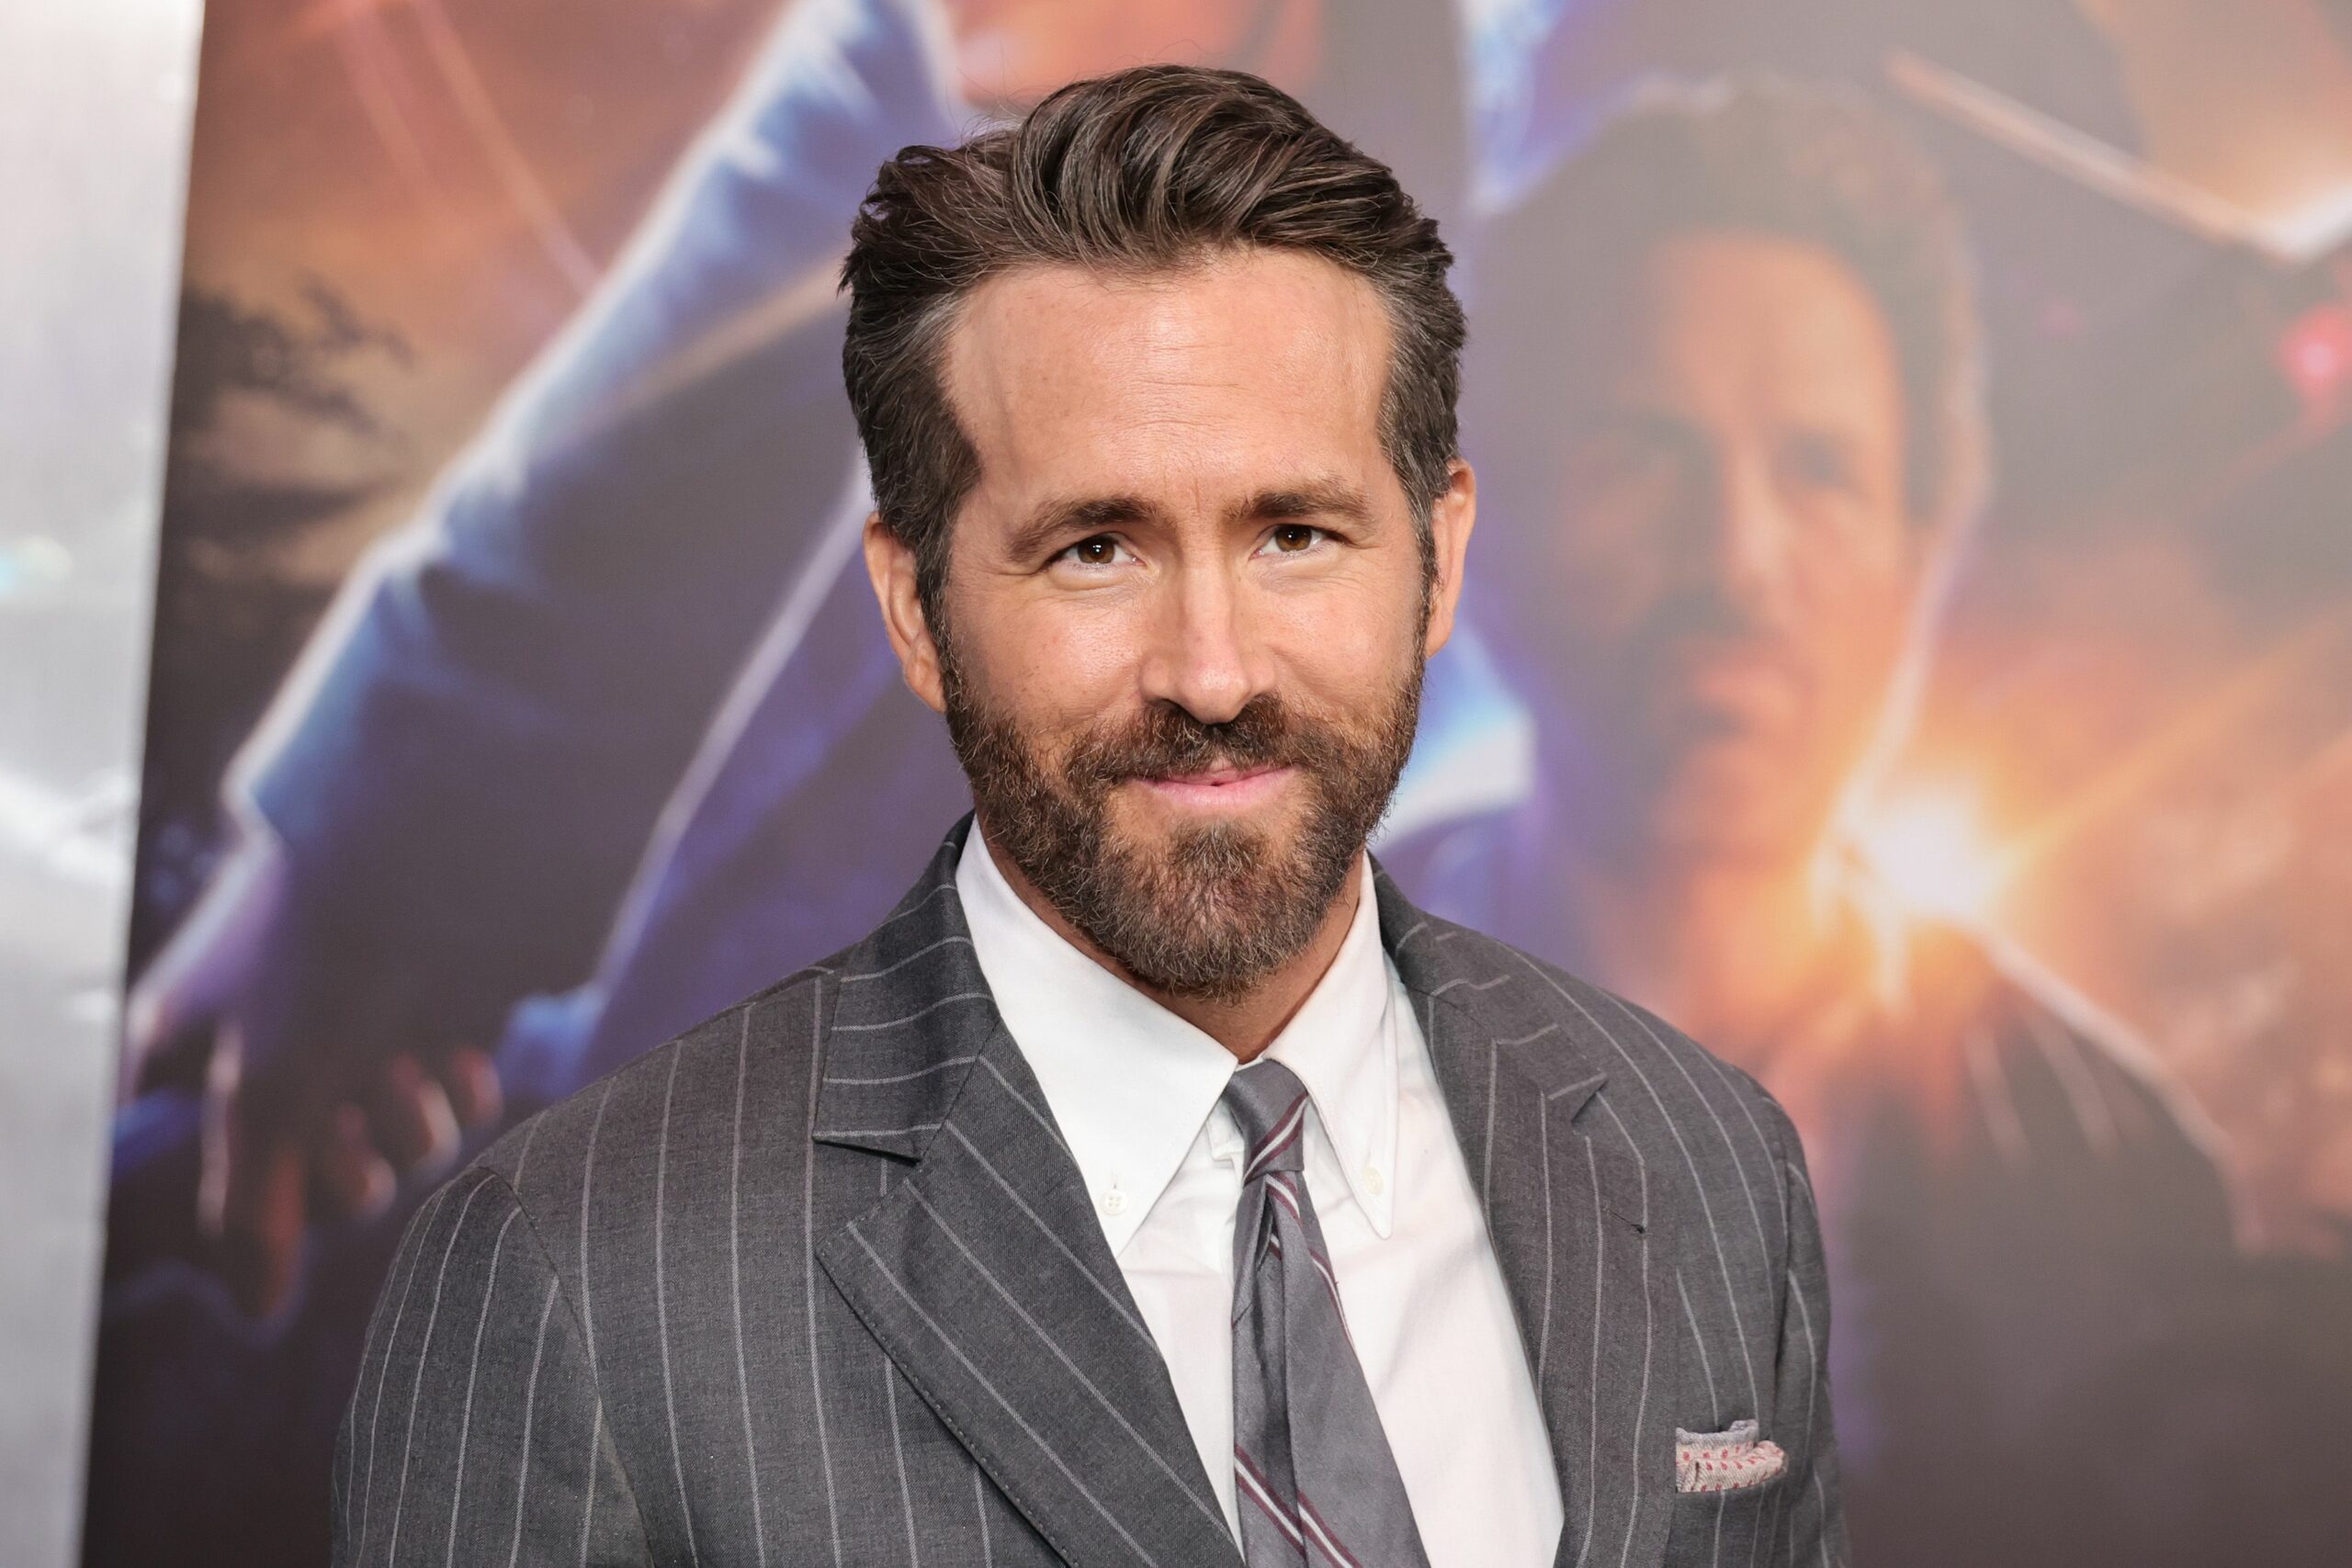 Why Did Ryan Reynolds' New Movie 'IF' Get Such Low Reviews? Fans and Critics Clash Over Surprising Scores